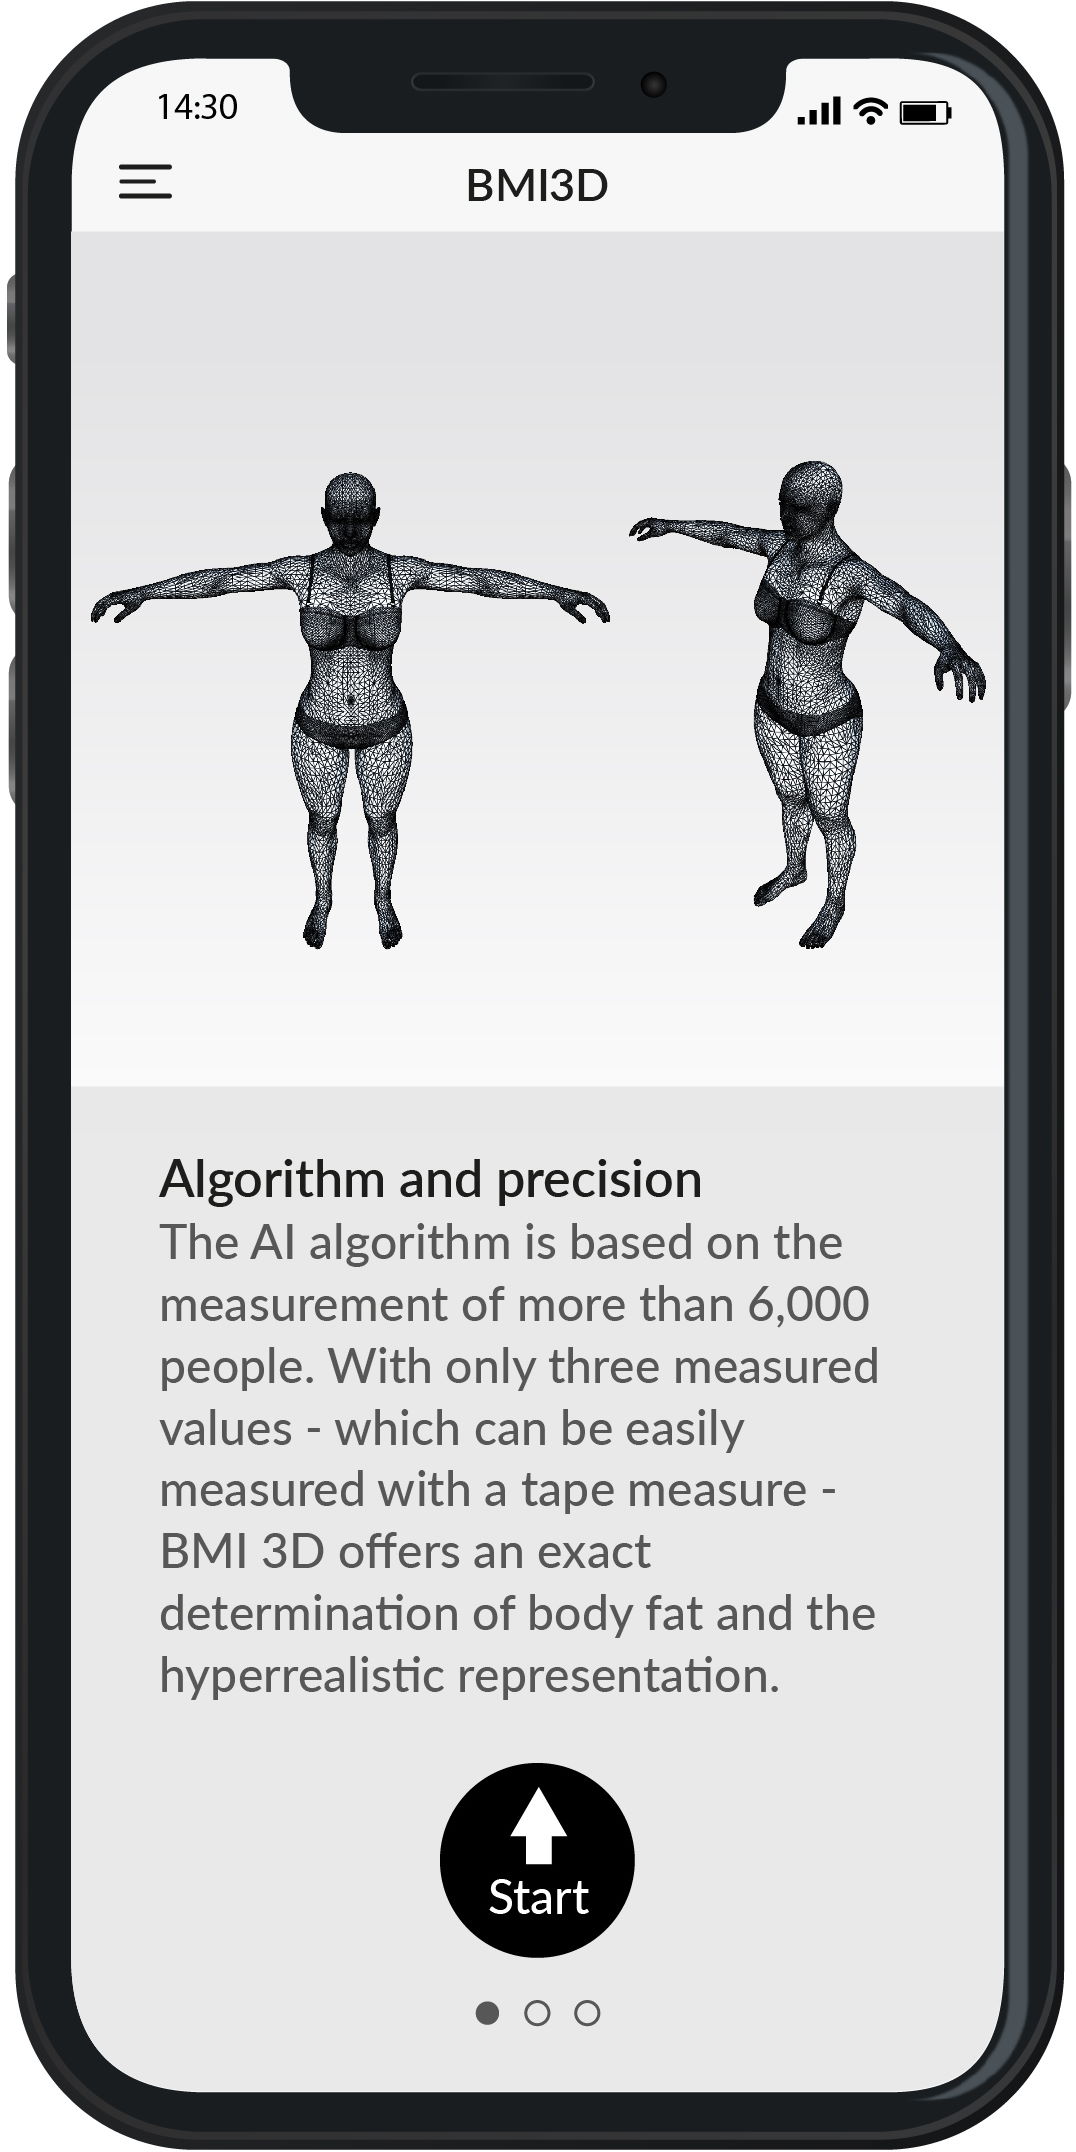 Bmi Calculator What Is My Bmi Our Calculator With 3d Body View